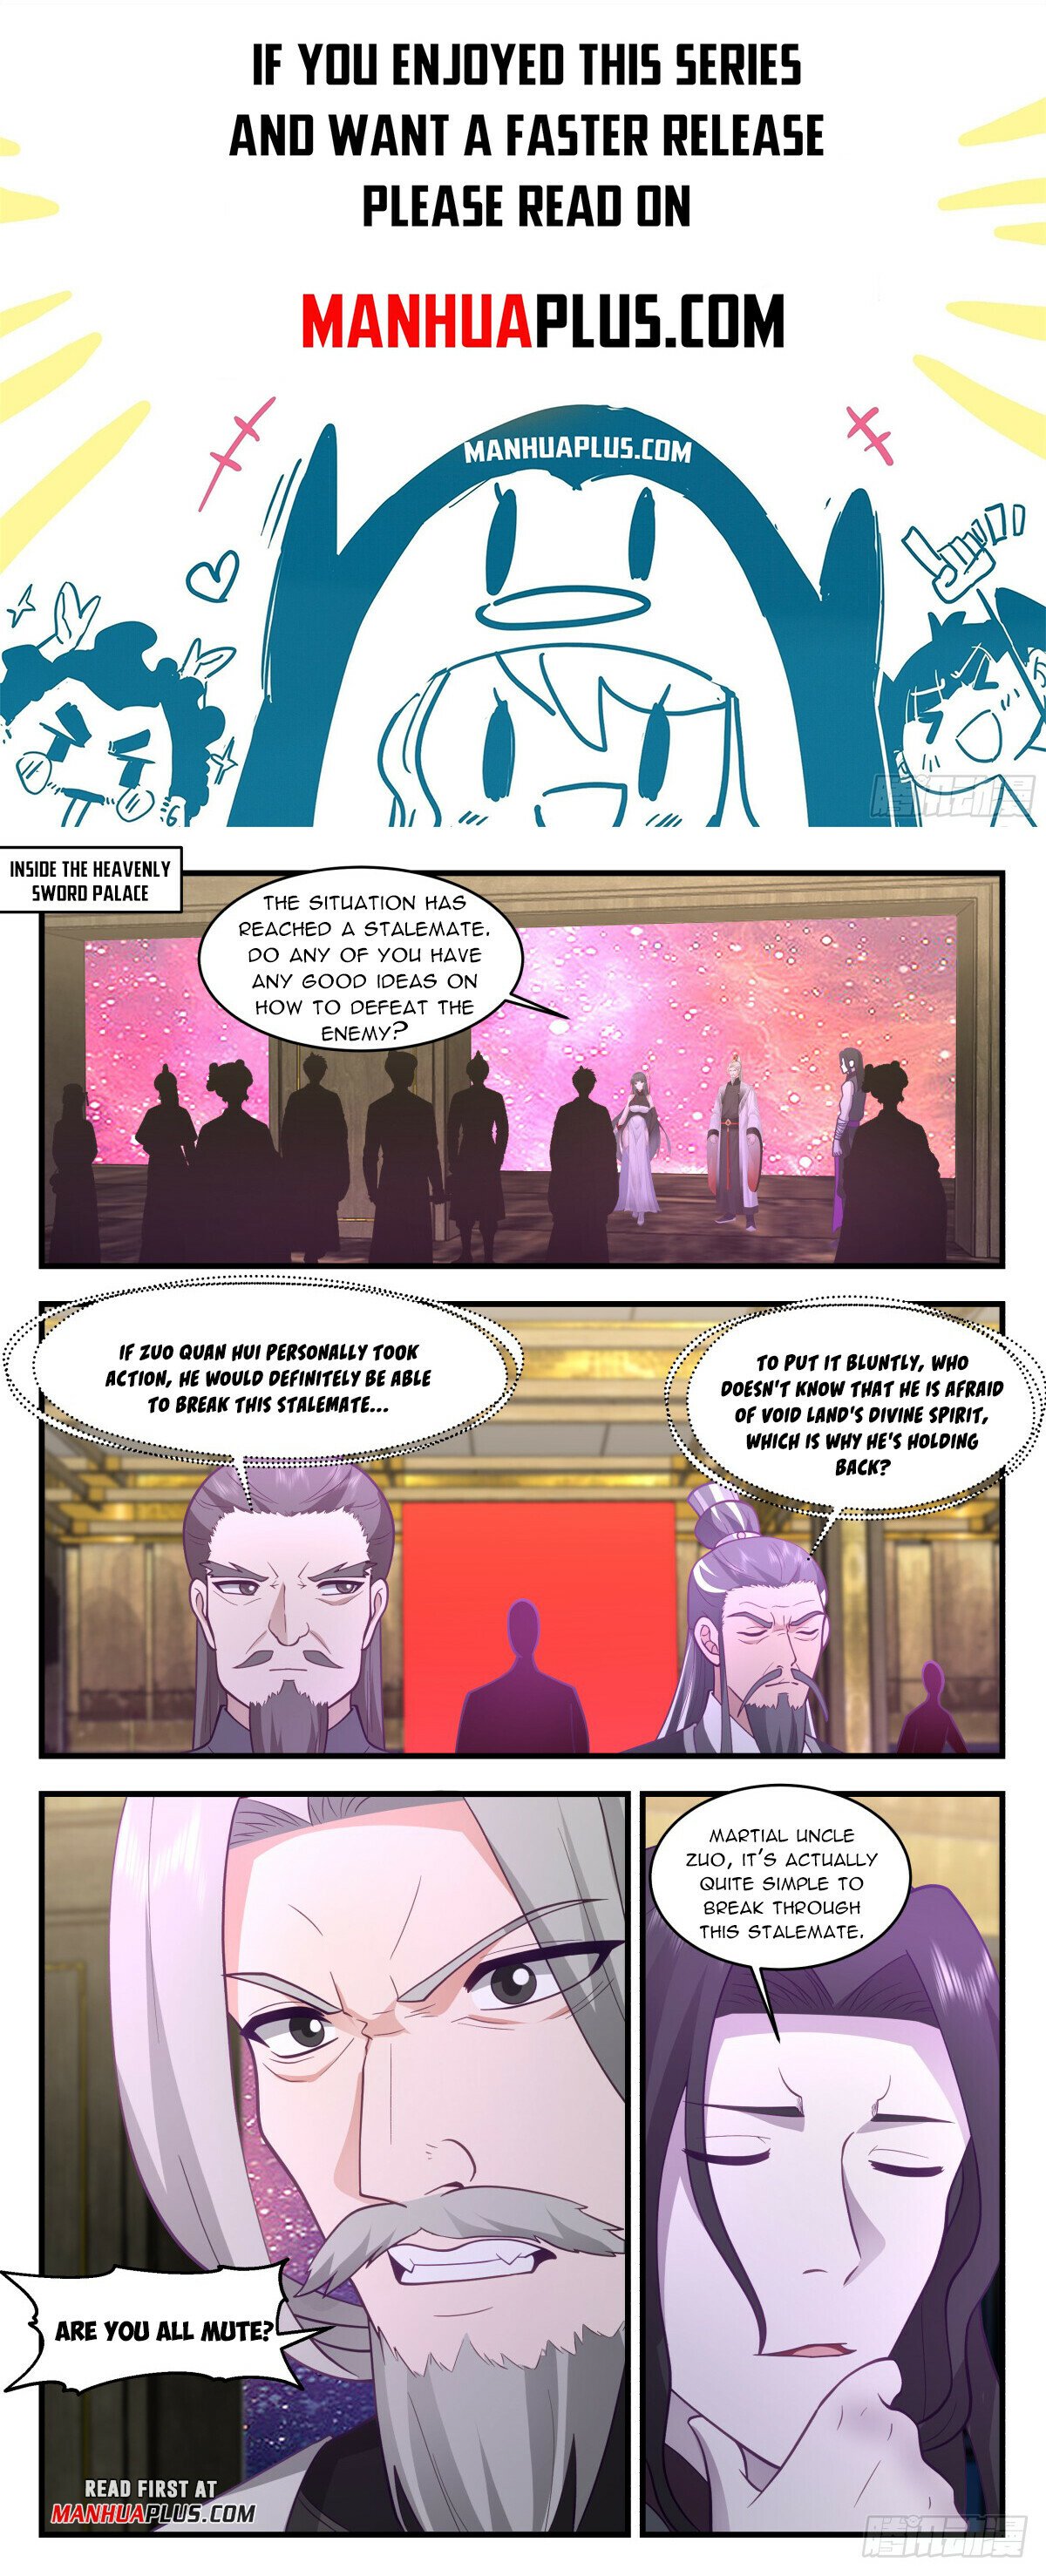 Martial Peak - Chapter 21146 - Soul Search - Image 1